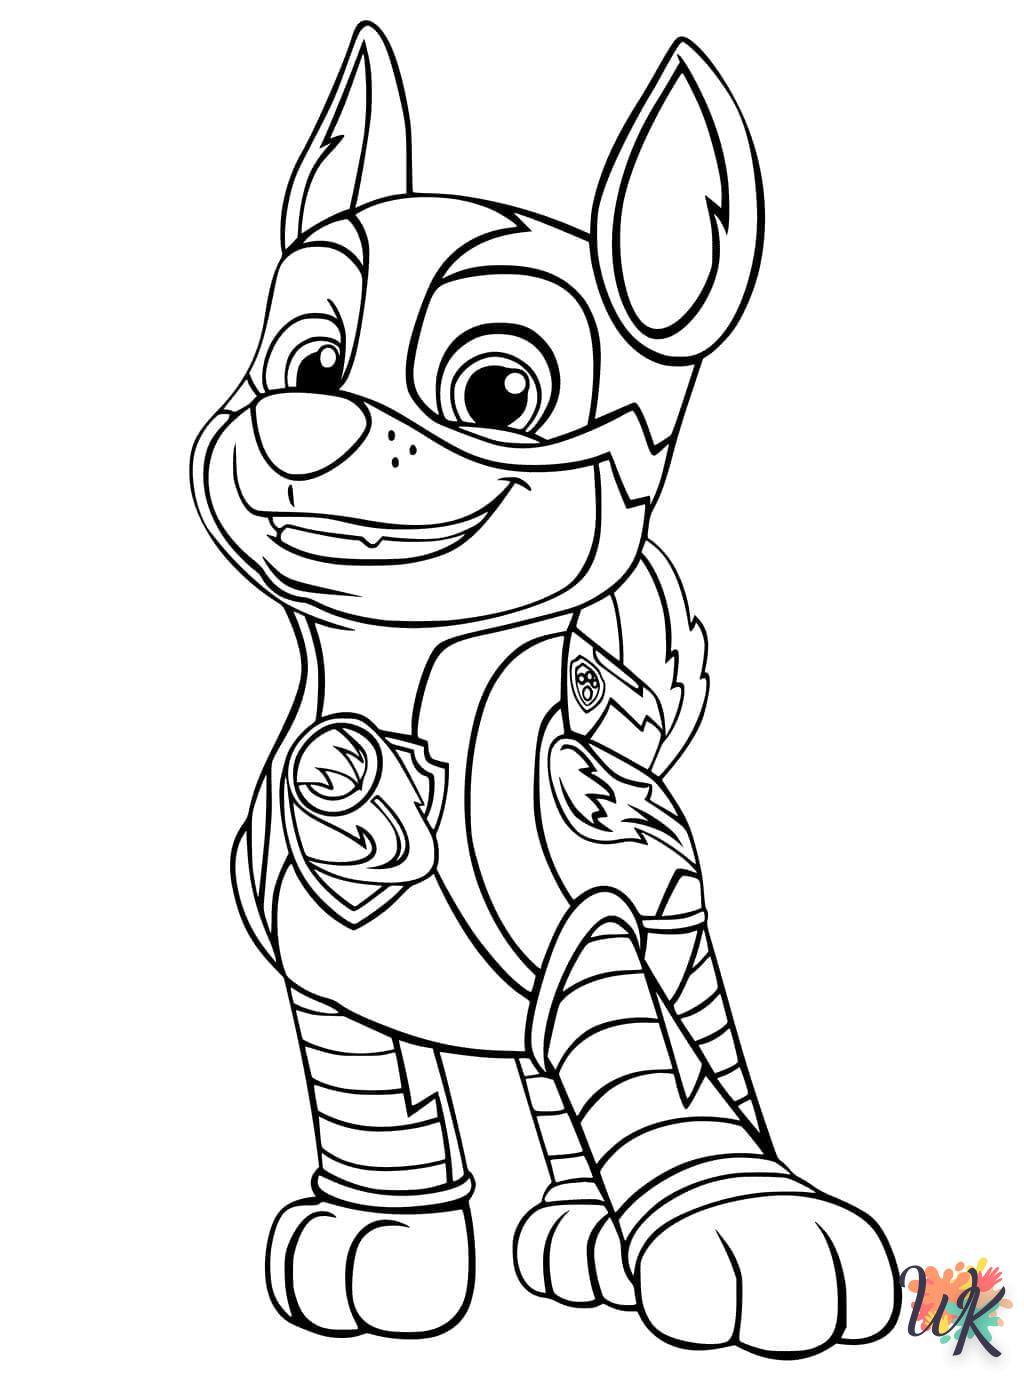 Paw Patrol coloring page to print for 7 year olds 1